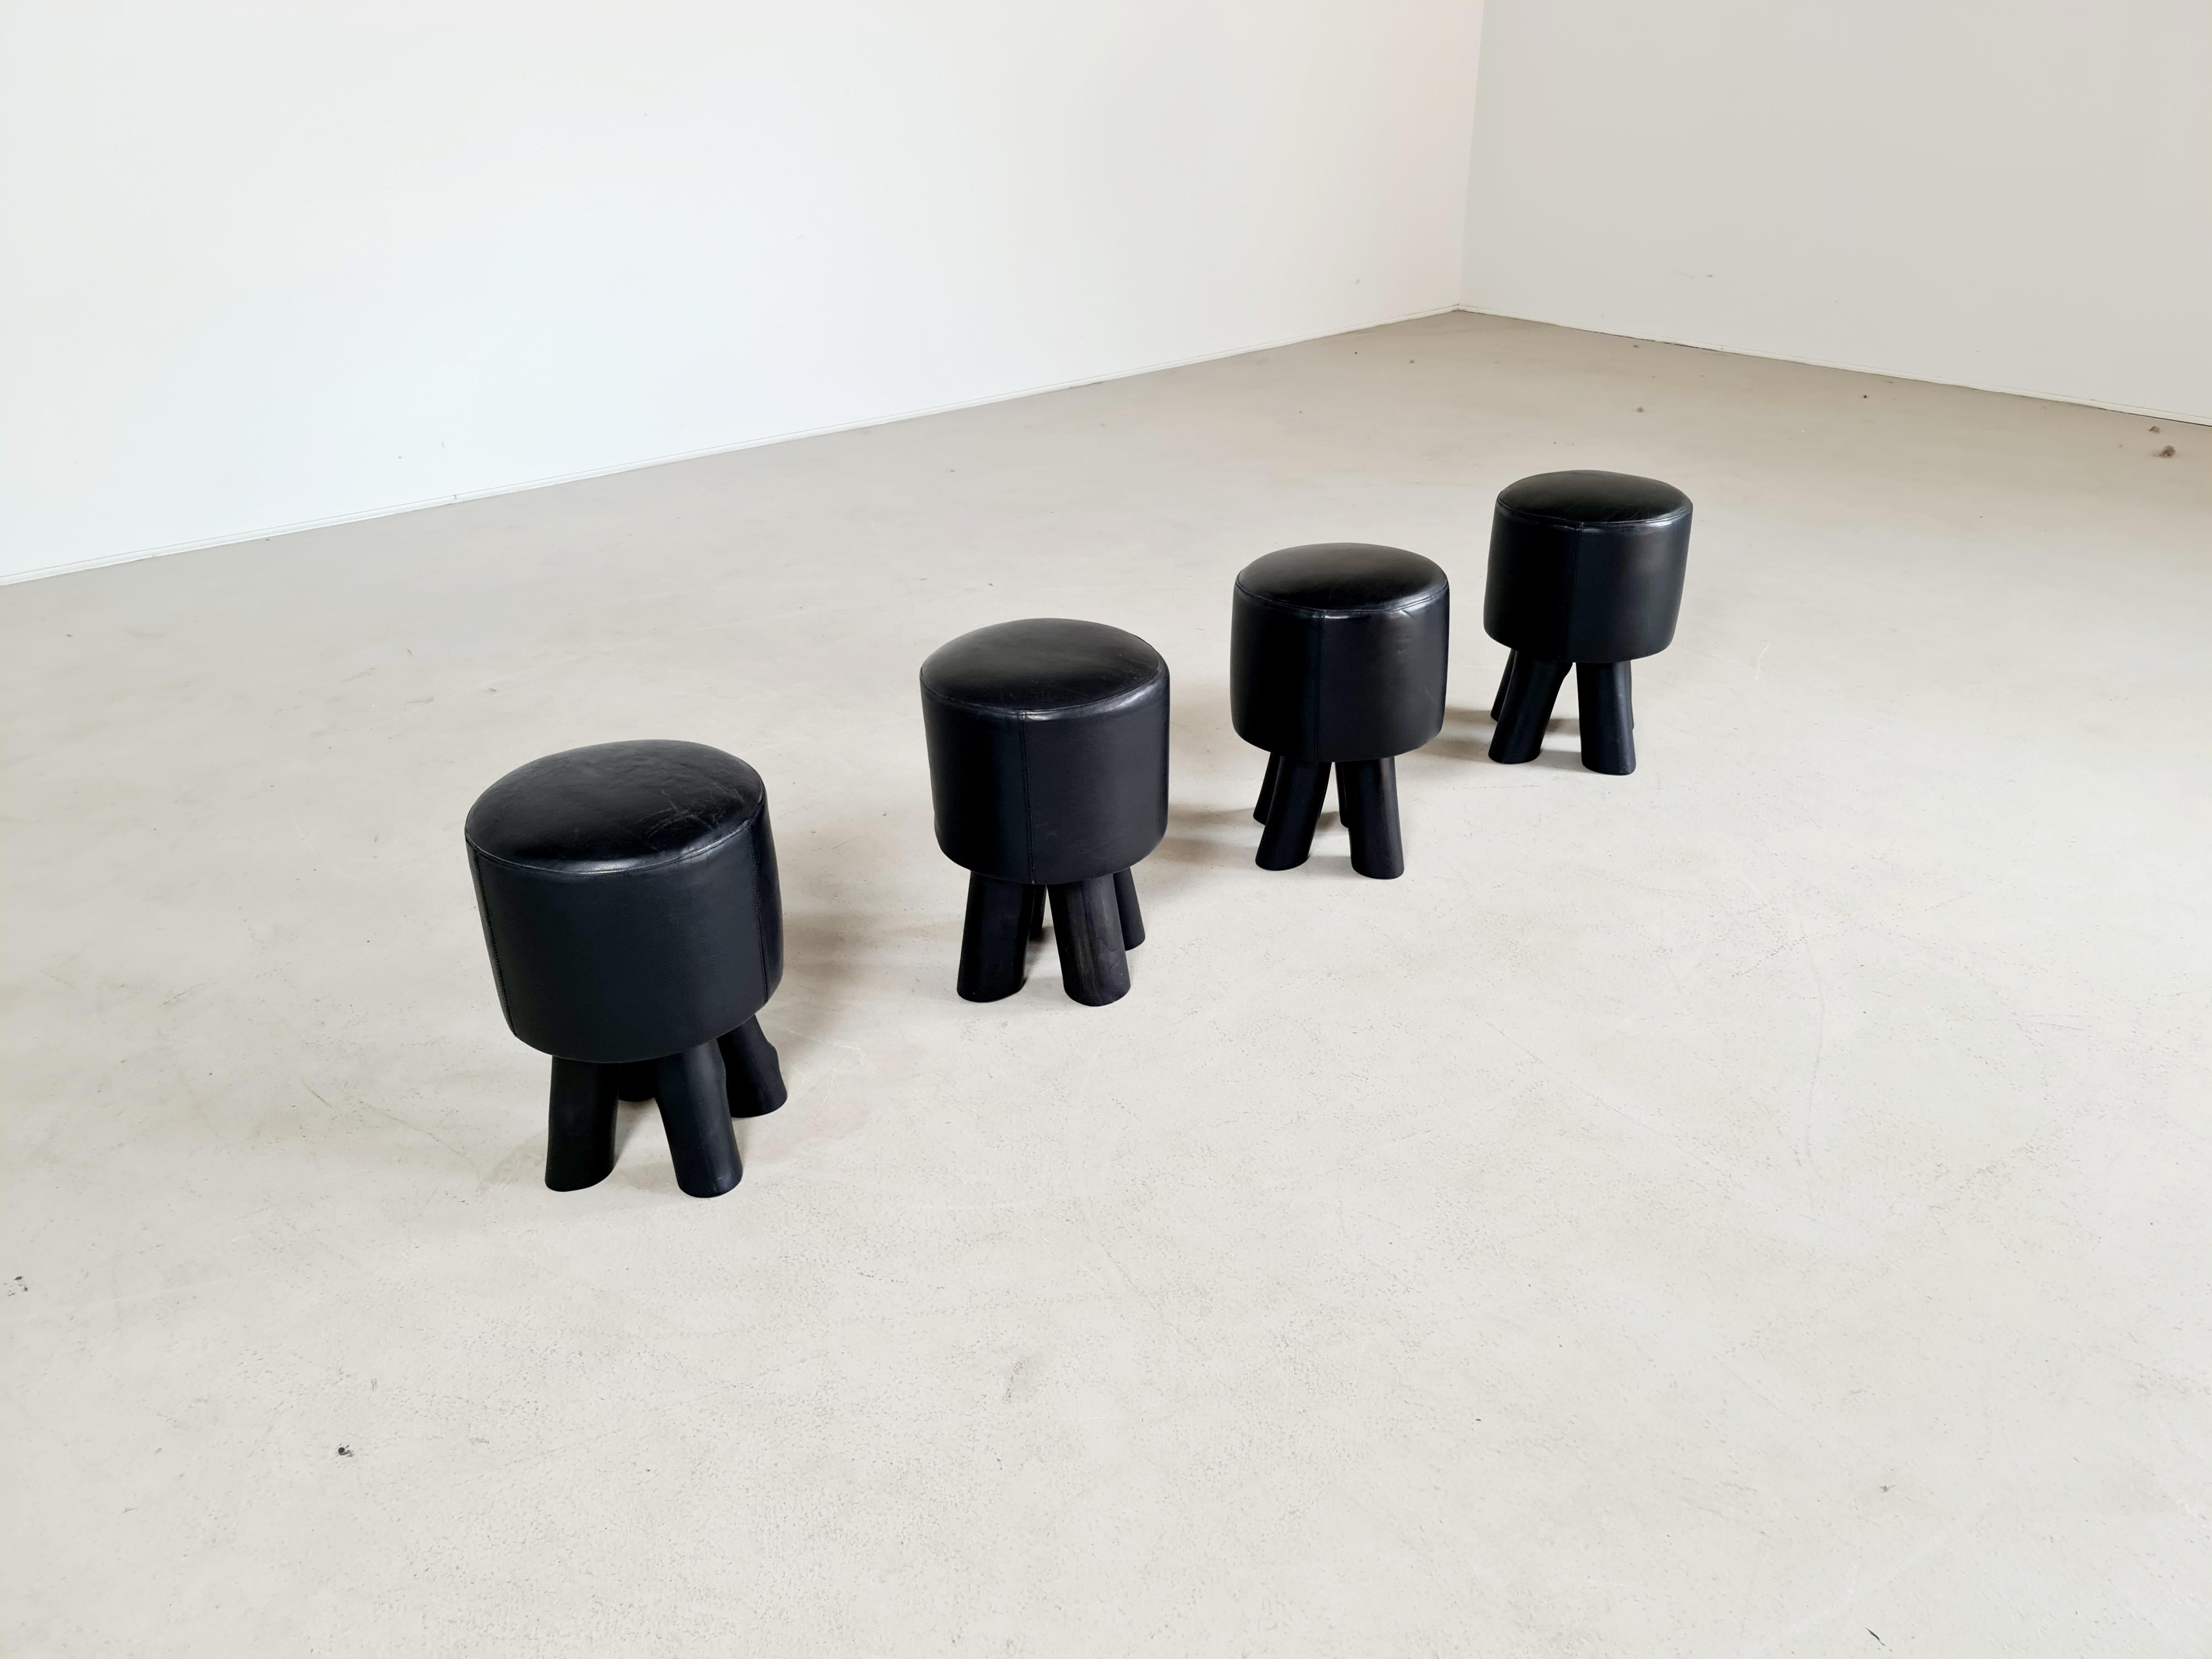 Leather Set of 4 Brutalist Stools from Belgium, 1970s